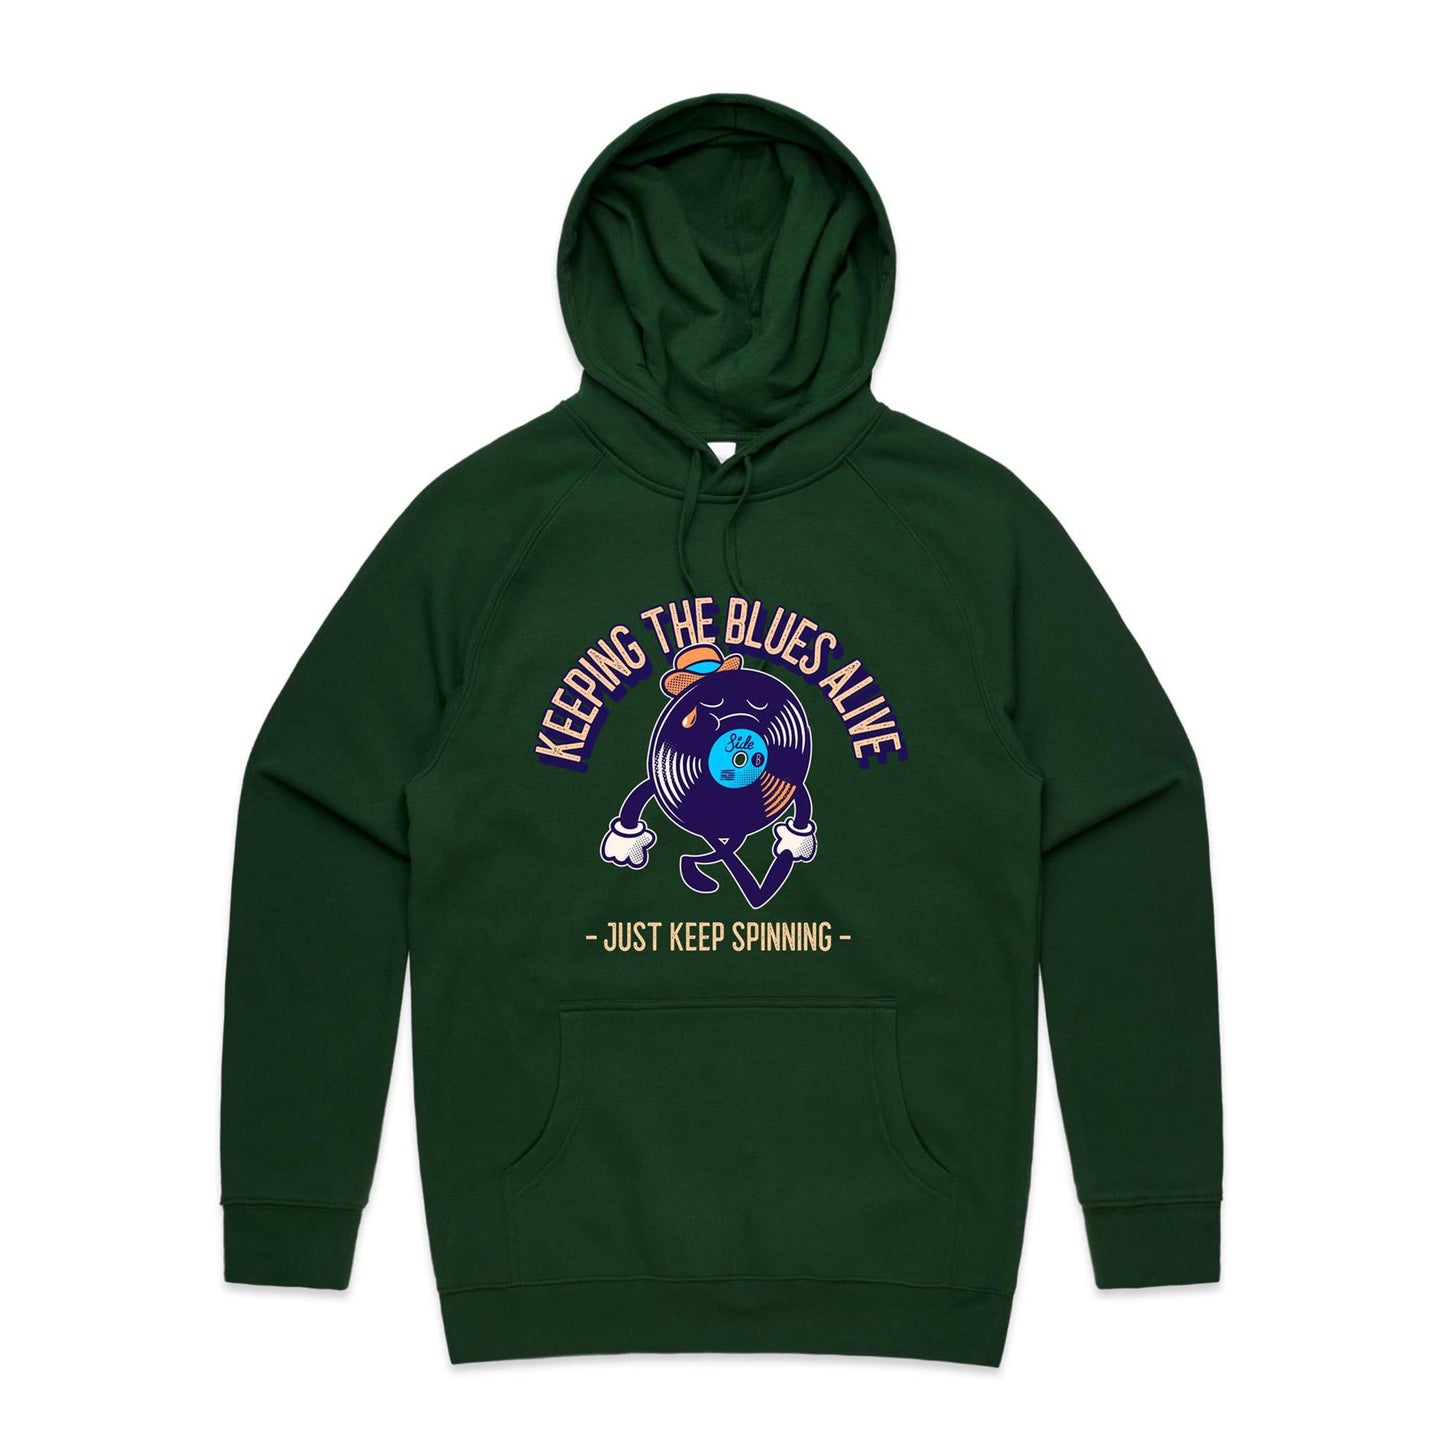 Keeping The Blues Alive - Supply Hood Forest Green Mens Supply Hoodie Music